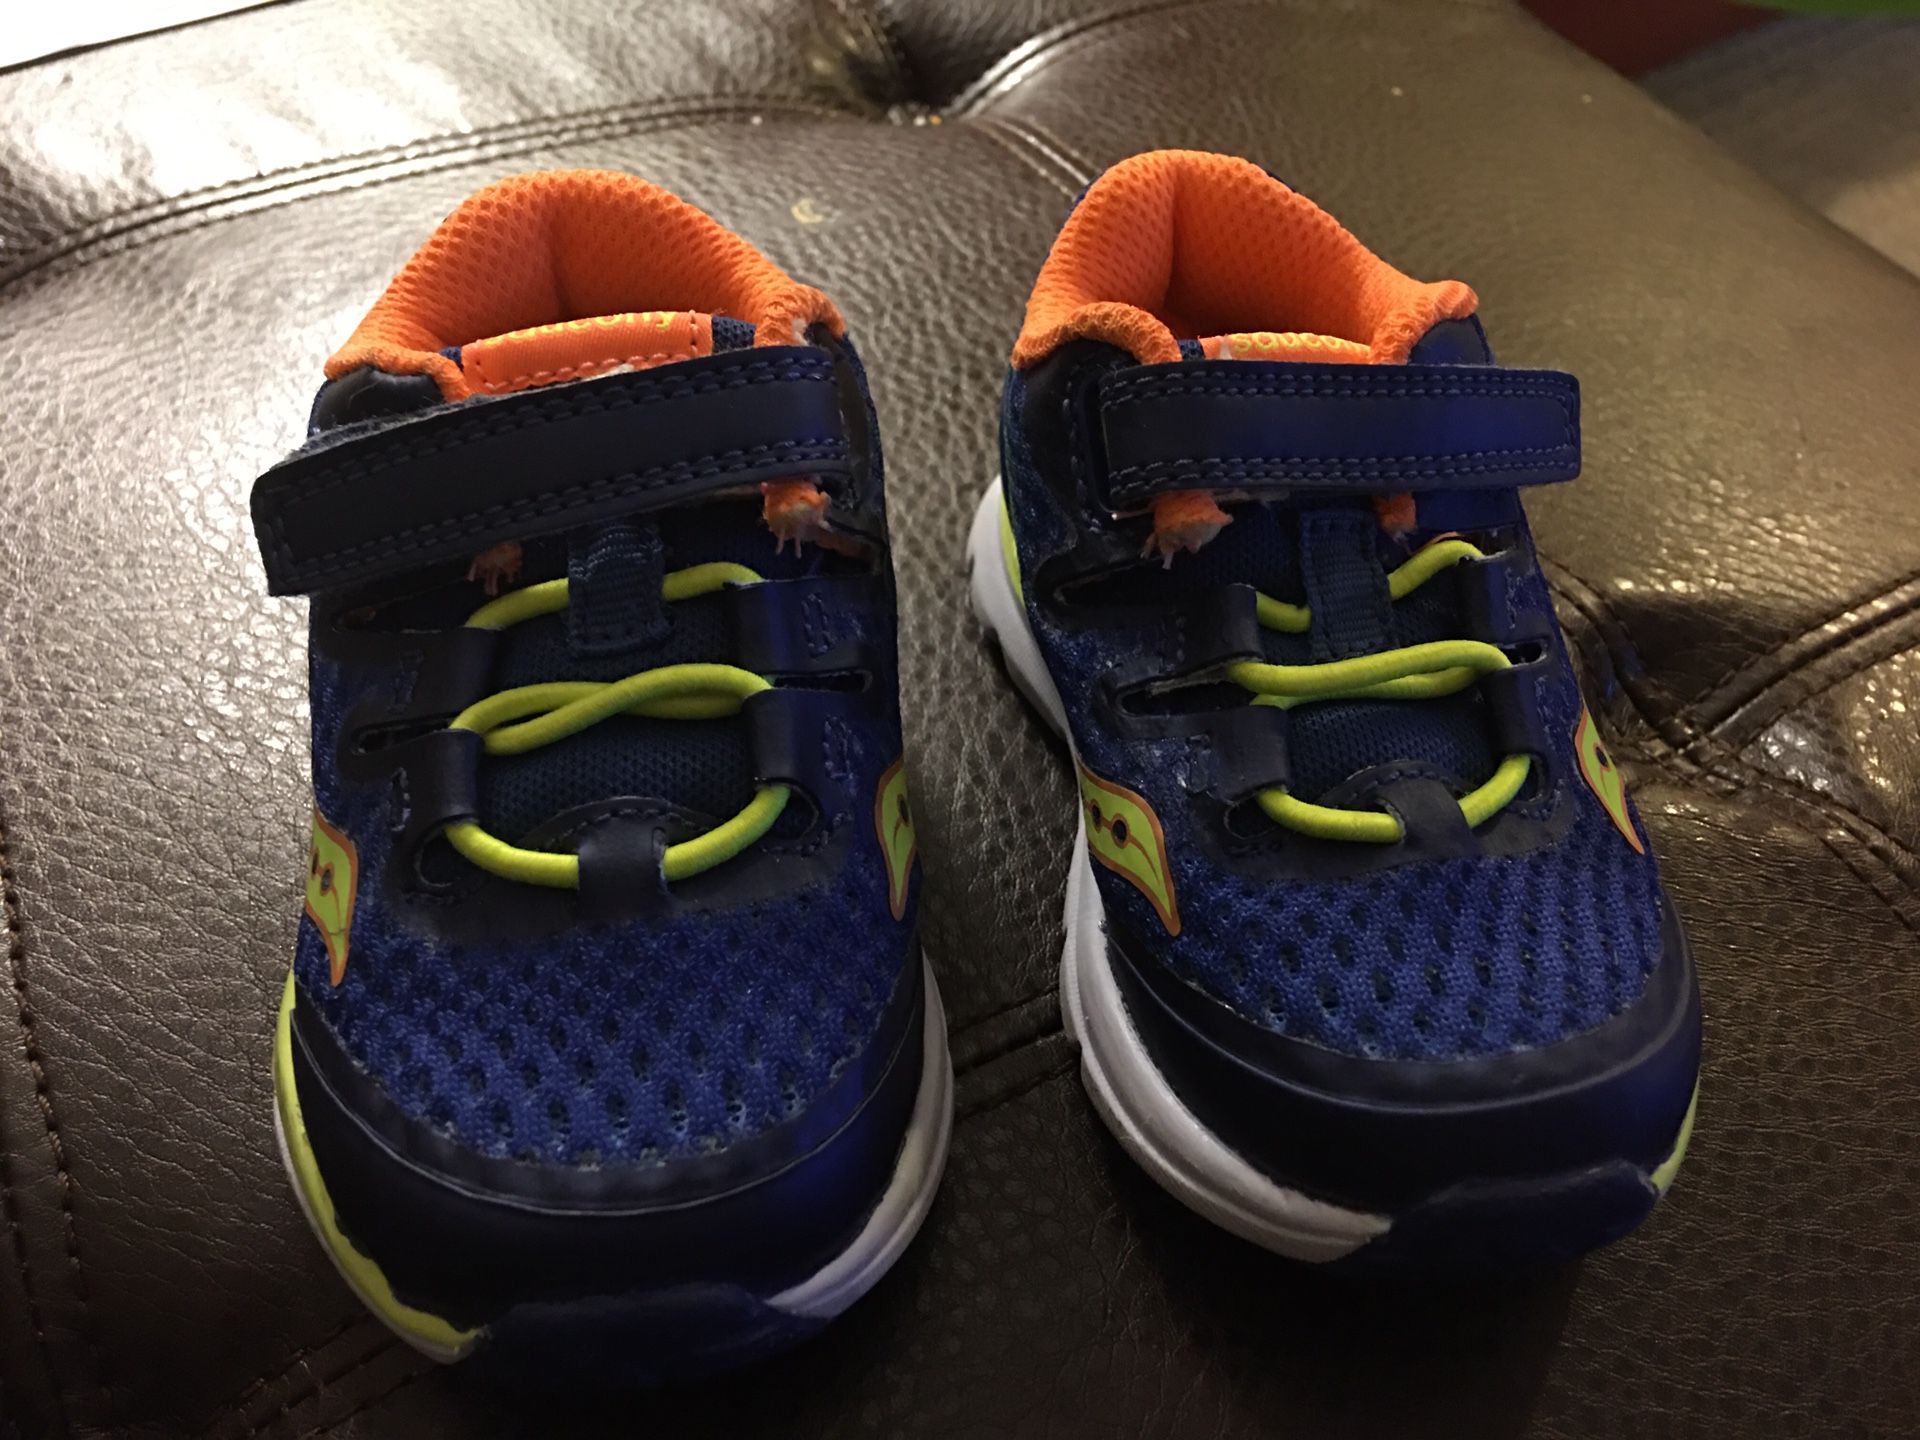 Saucony toddler shoes size 4.5c